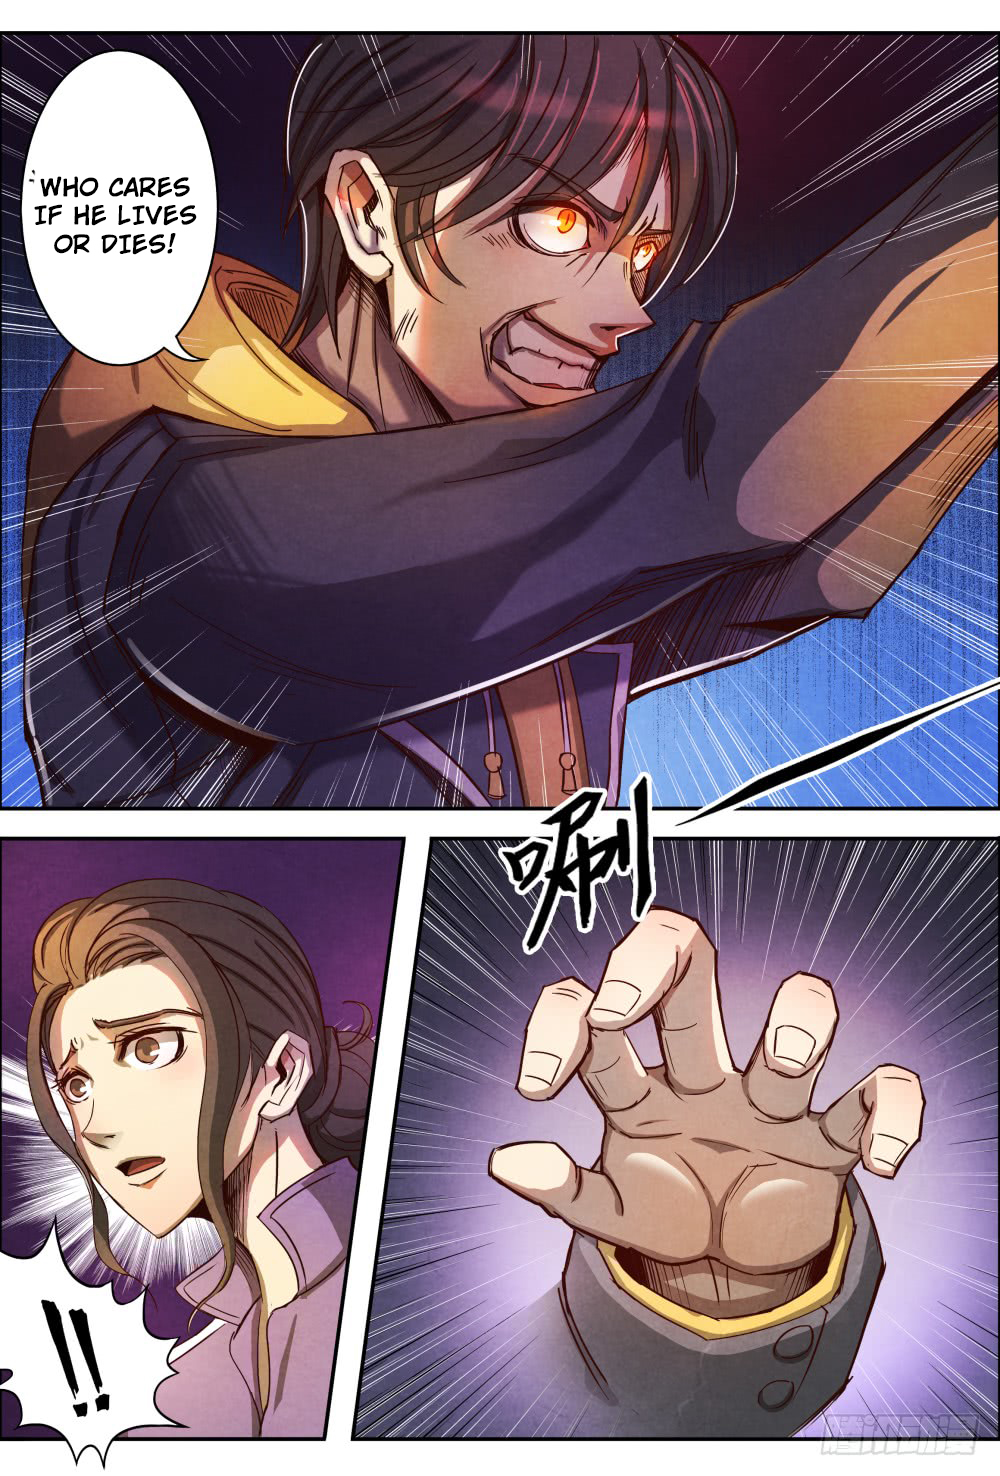 Return From the World of Immortals Vol. 1 Ch. 5 who cares if he lives or dies